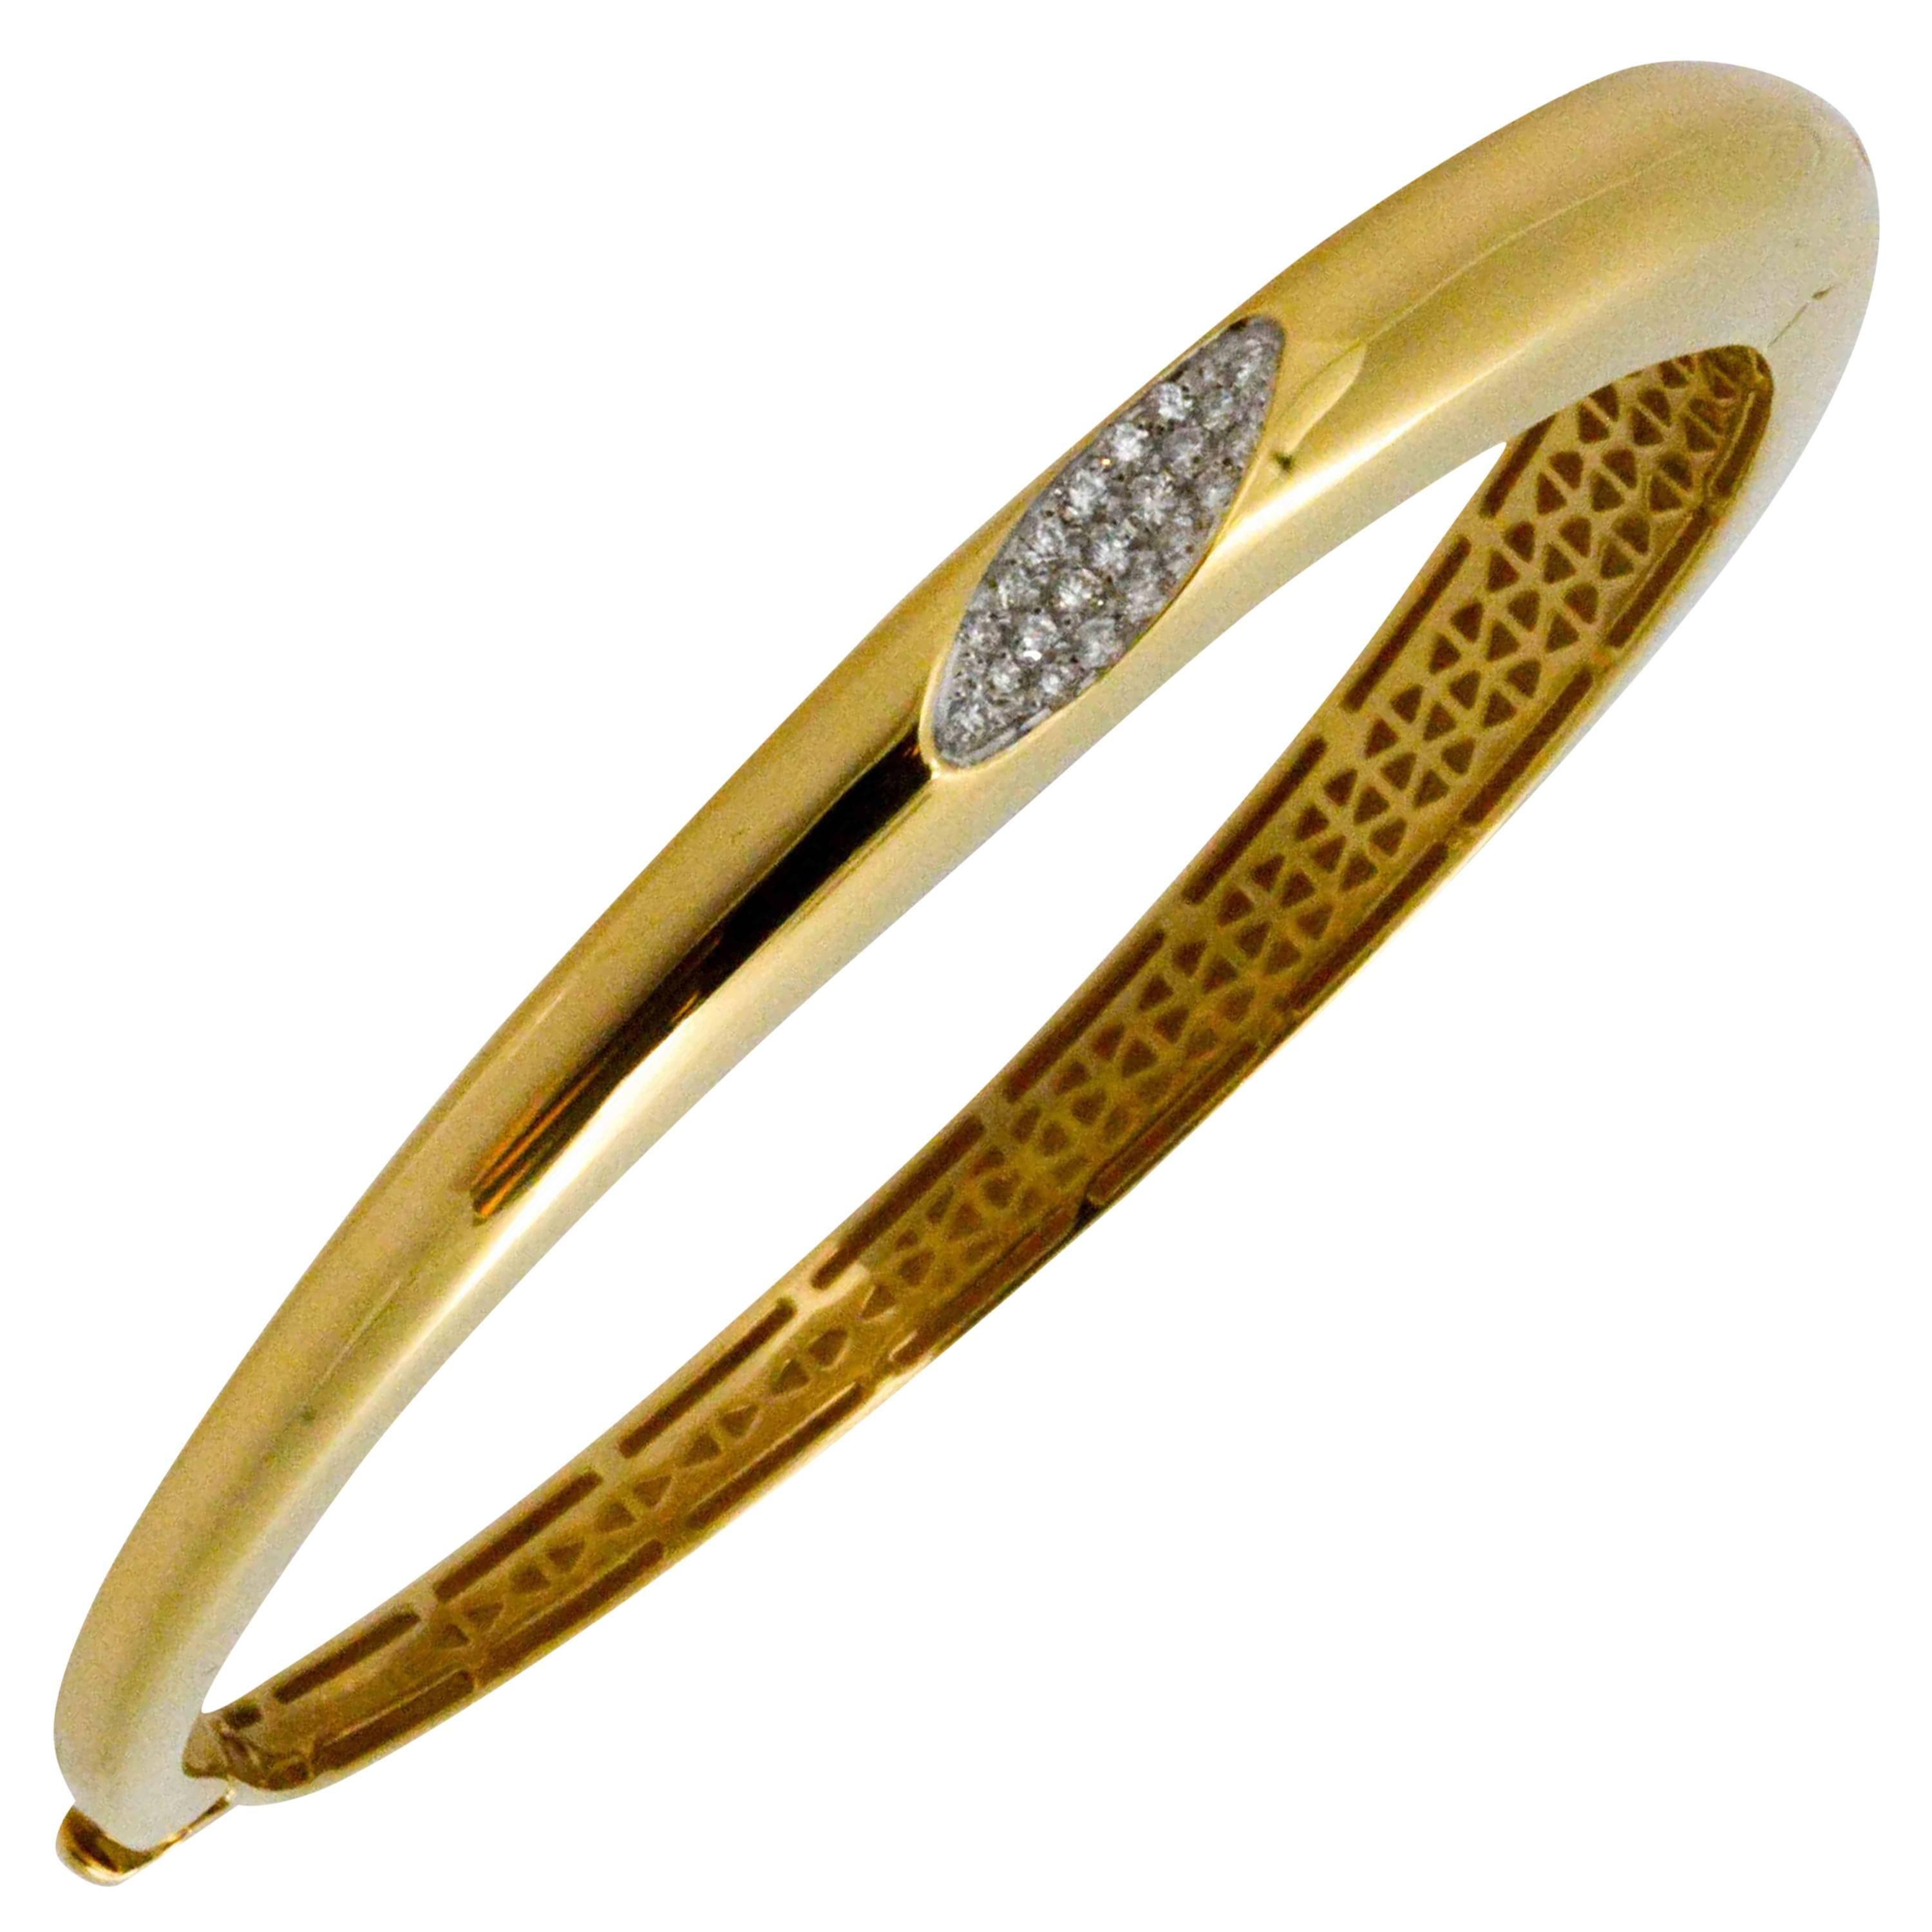 Created by Italian designer Roberto Coin with a sleek tapered shape and starring round brilliant cut diamonds, you will reach for this gold bangle bracelet every day. Crafted in 18 karat yellow gold, with intricate lattice work on the under side,